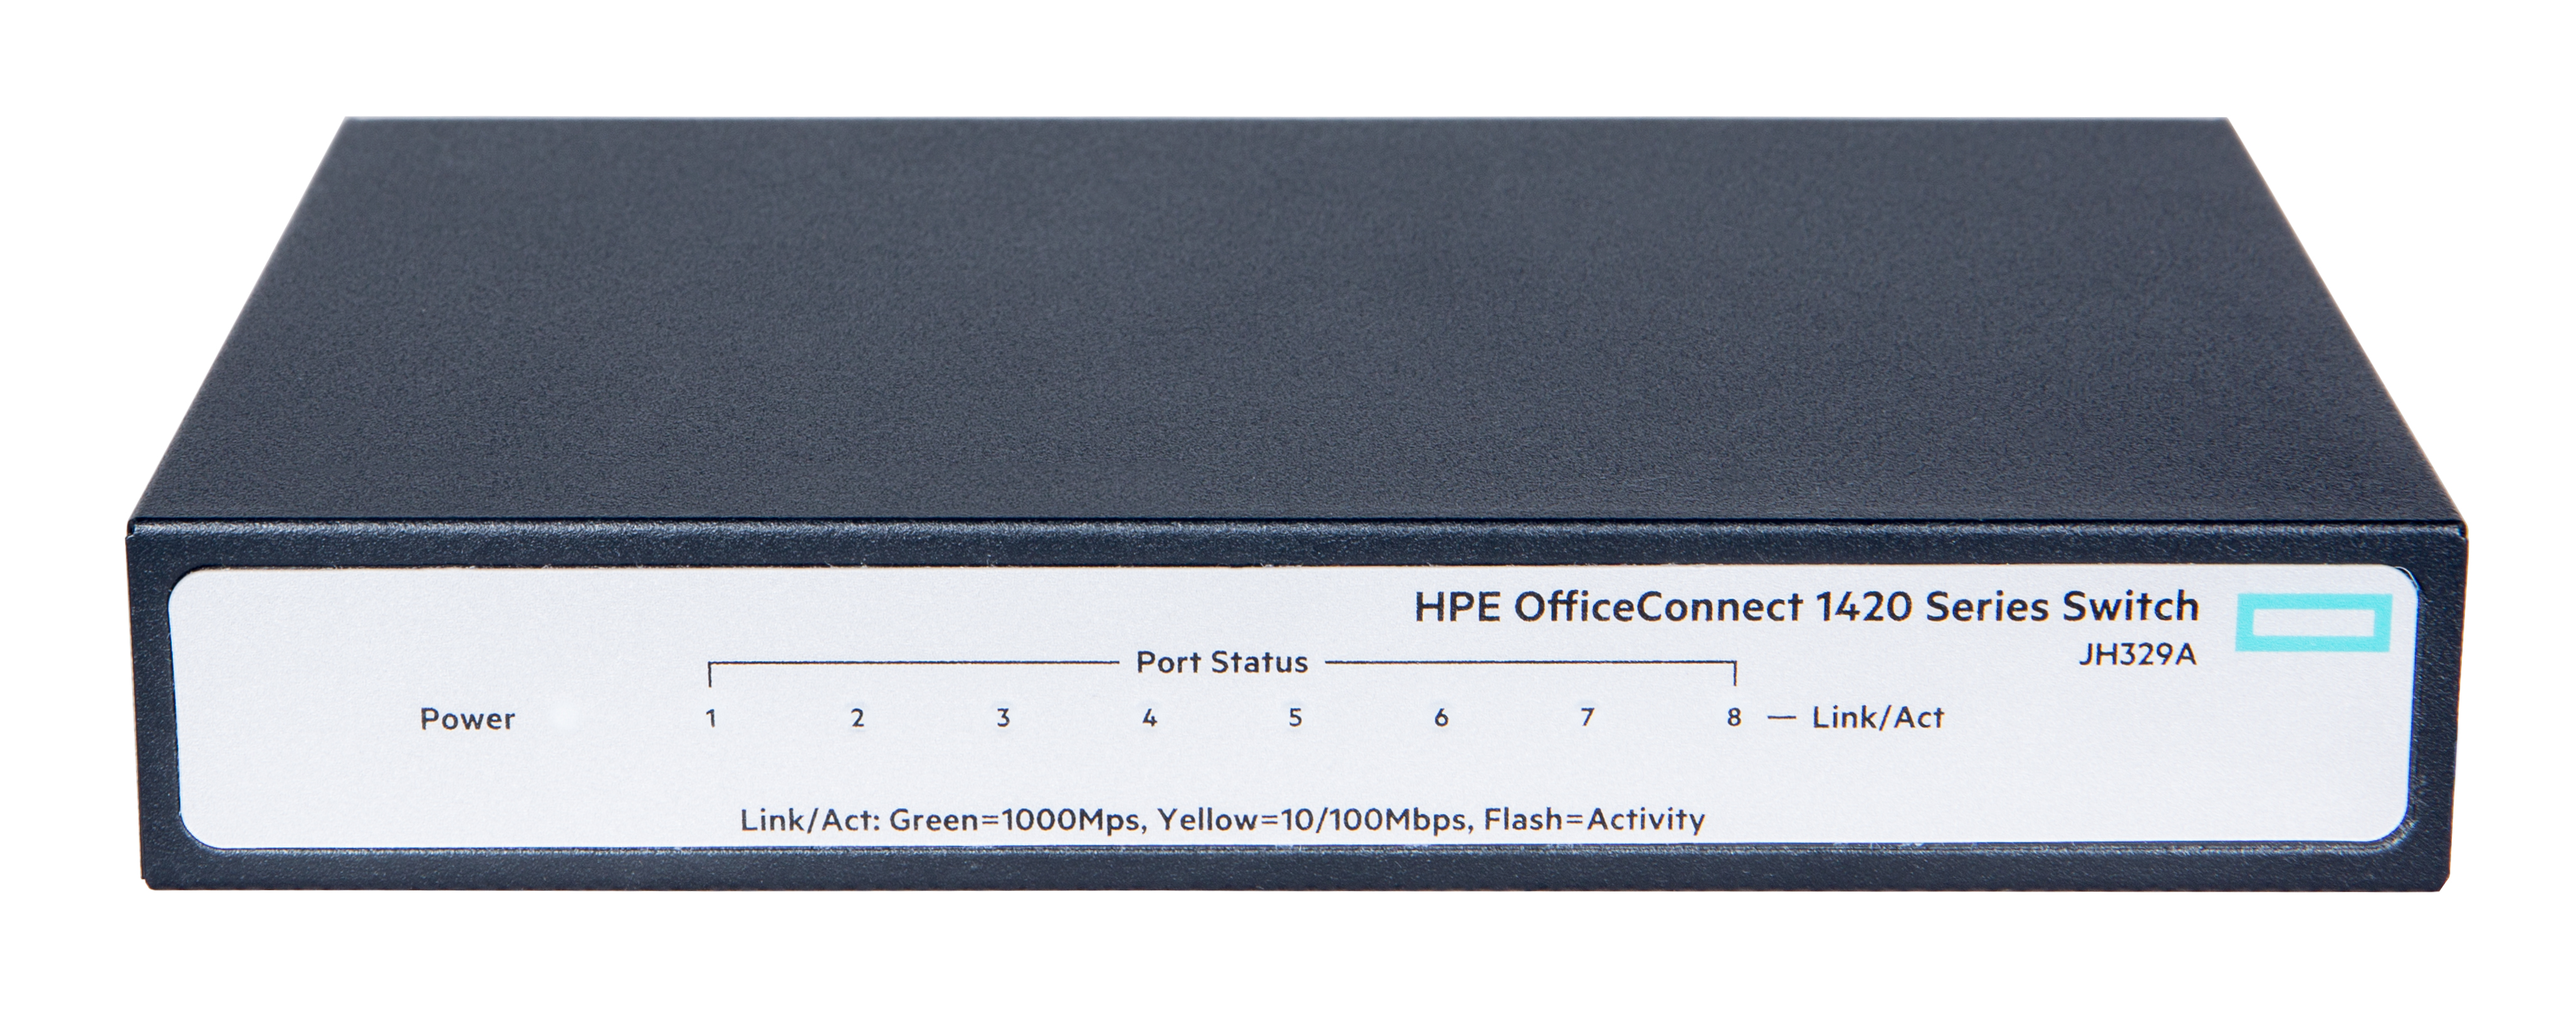 HPE OfficeConnect 1420 8G スイッチ